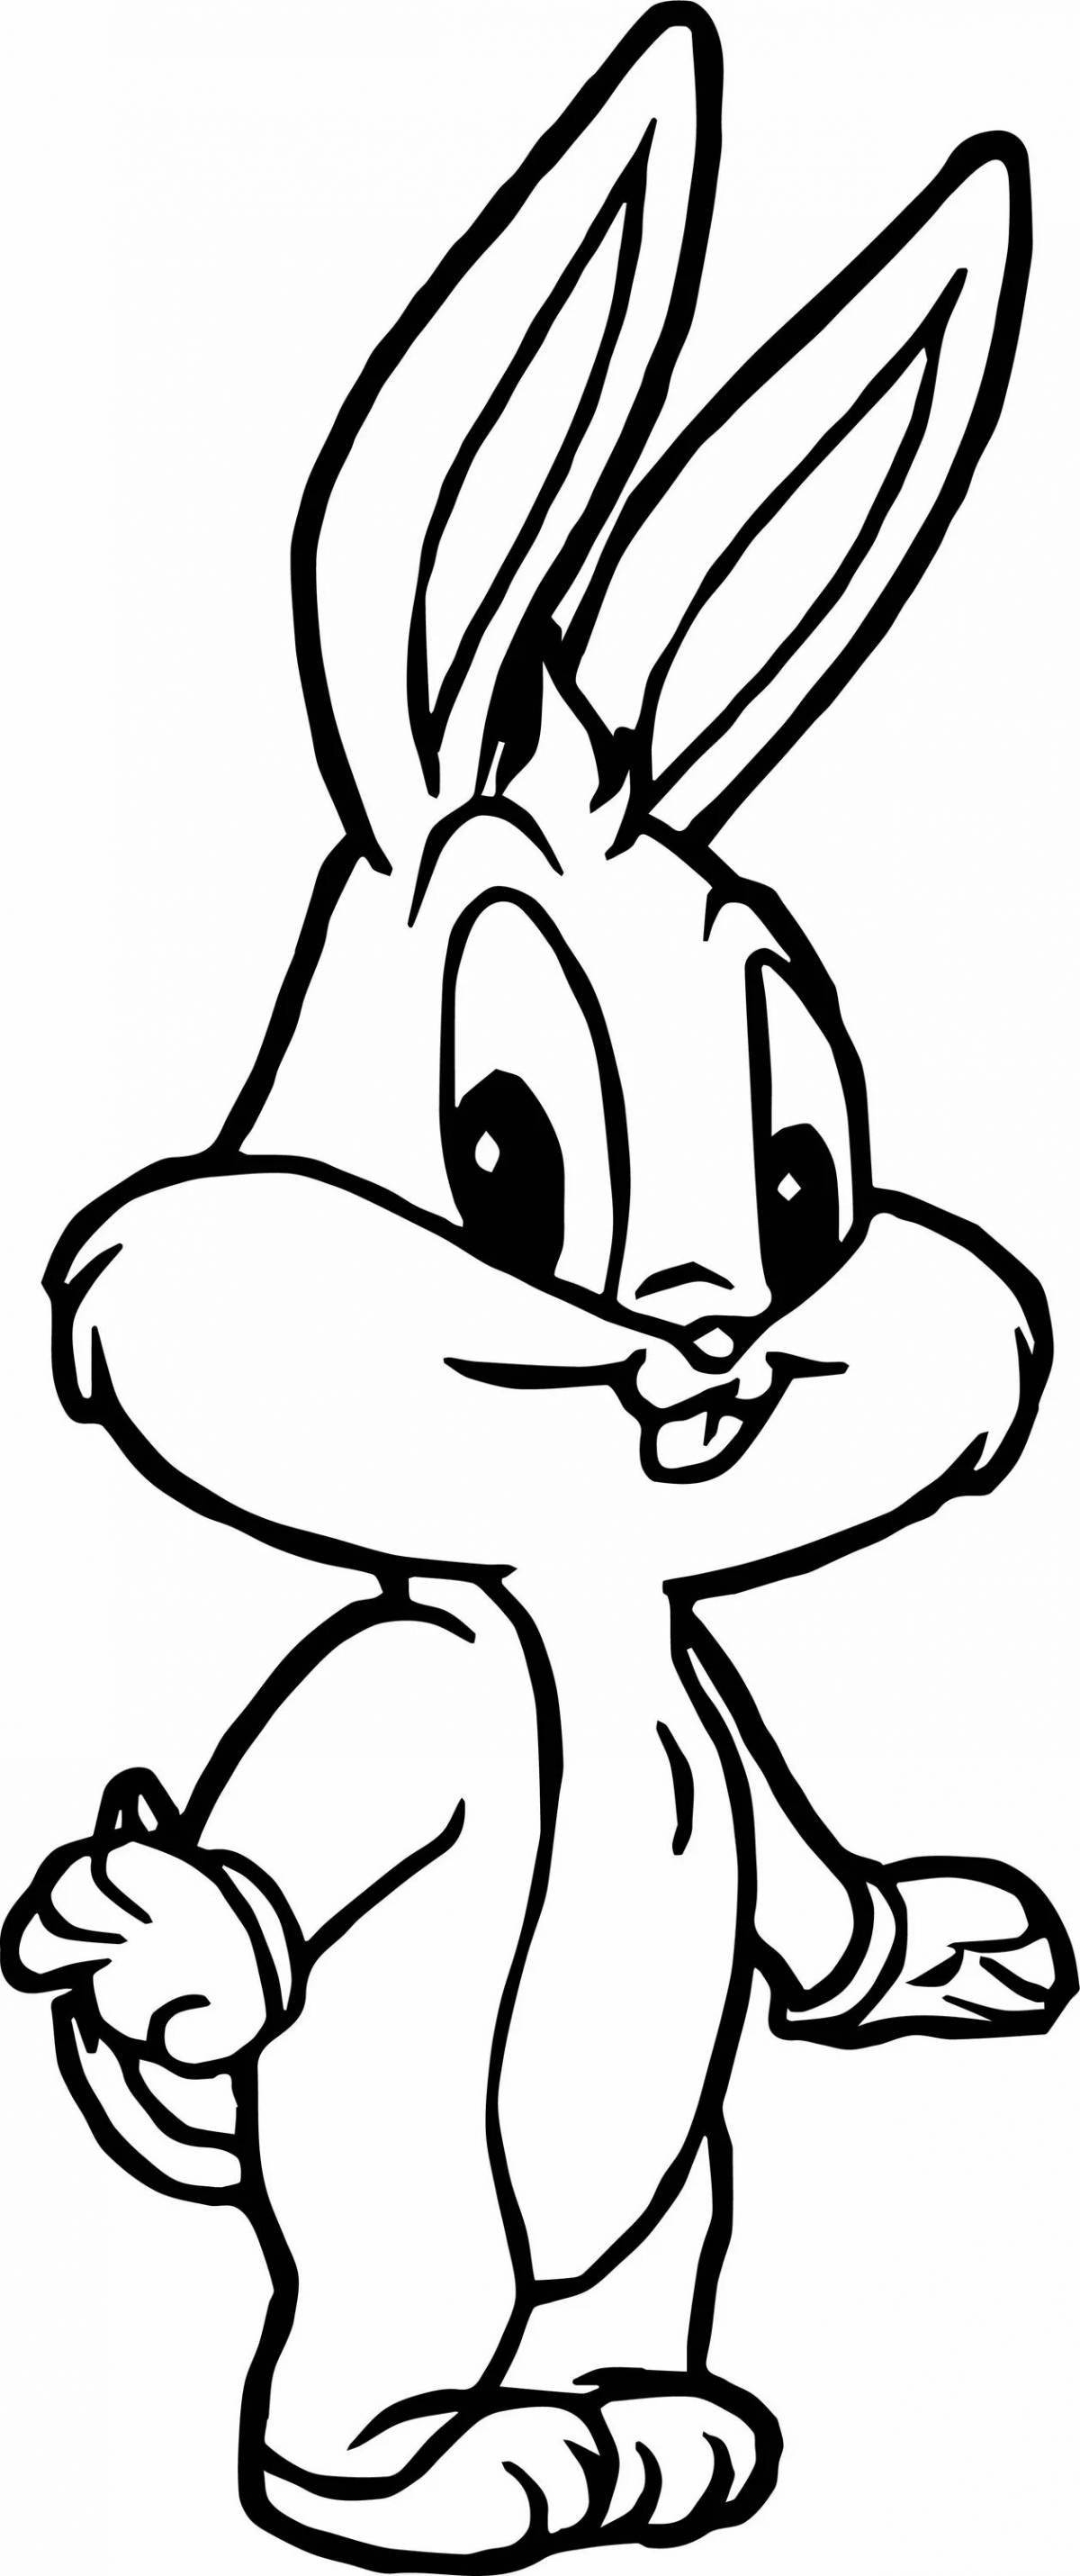 Playful cartoon hare coloring page